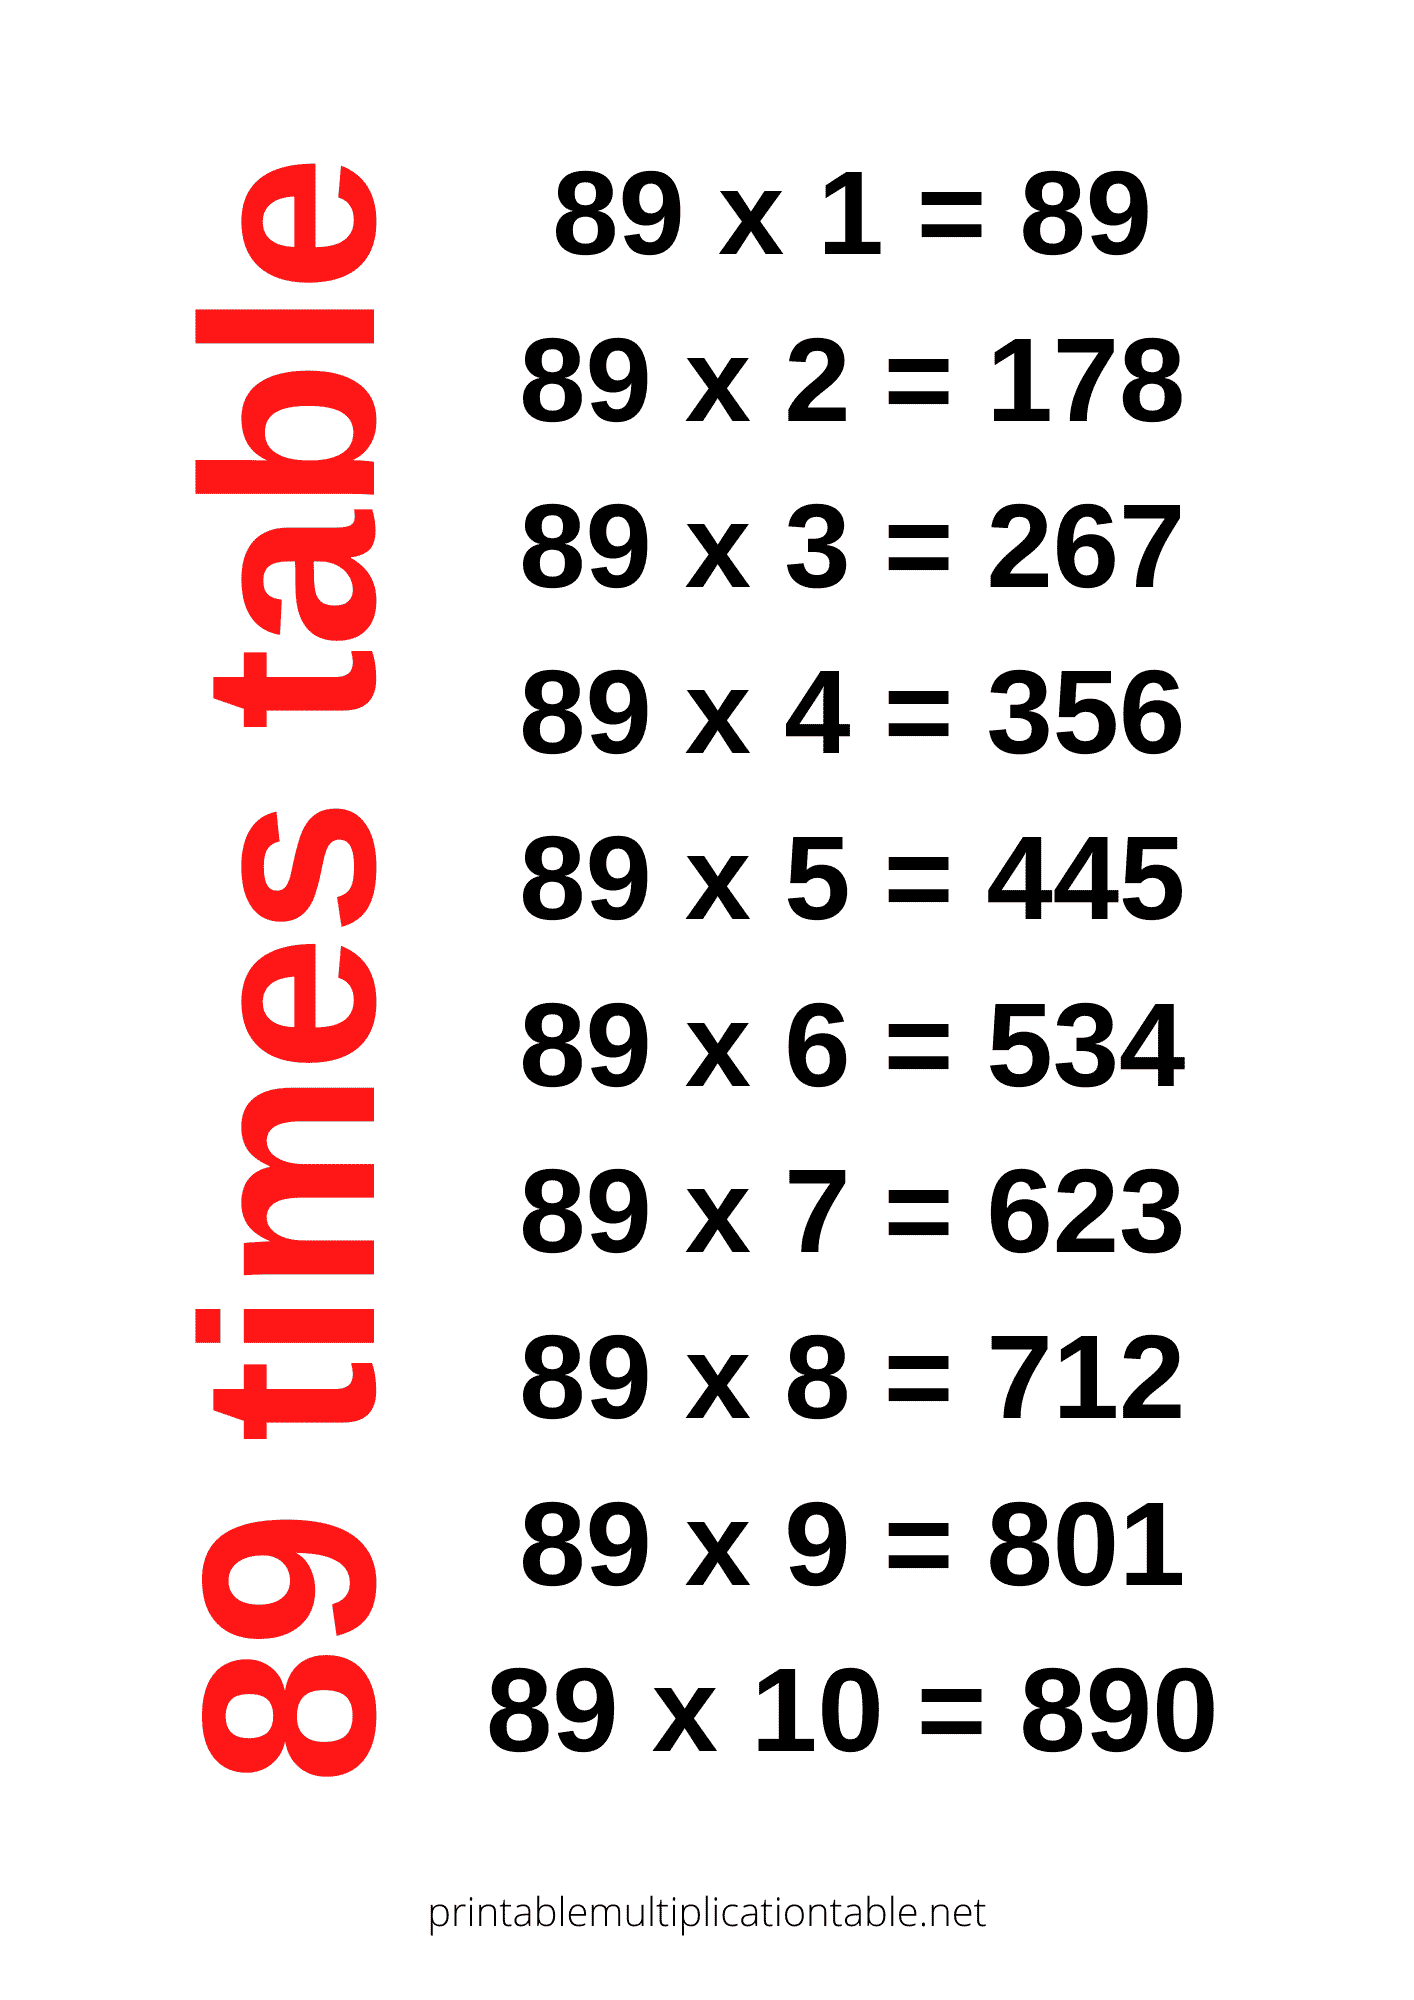 88 times table chart